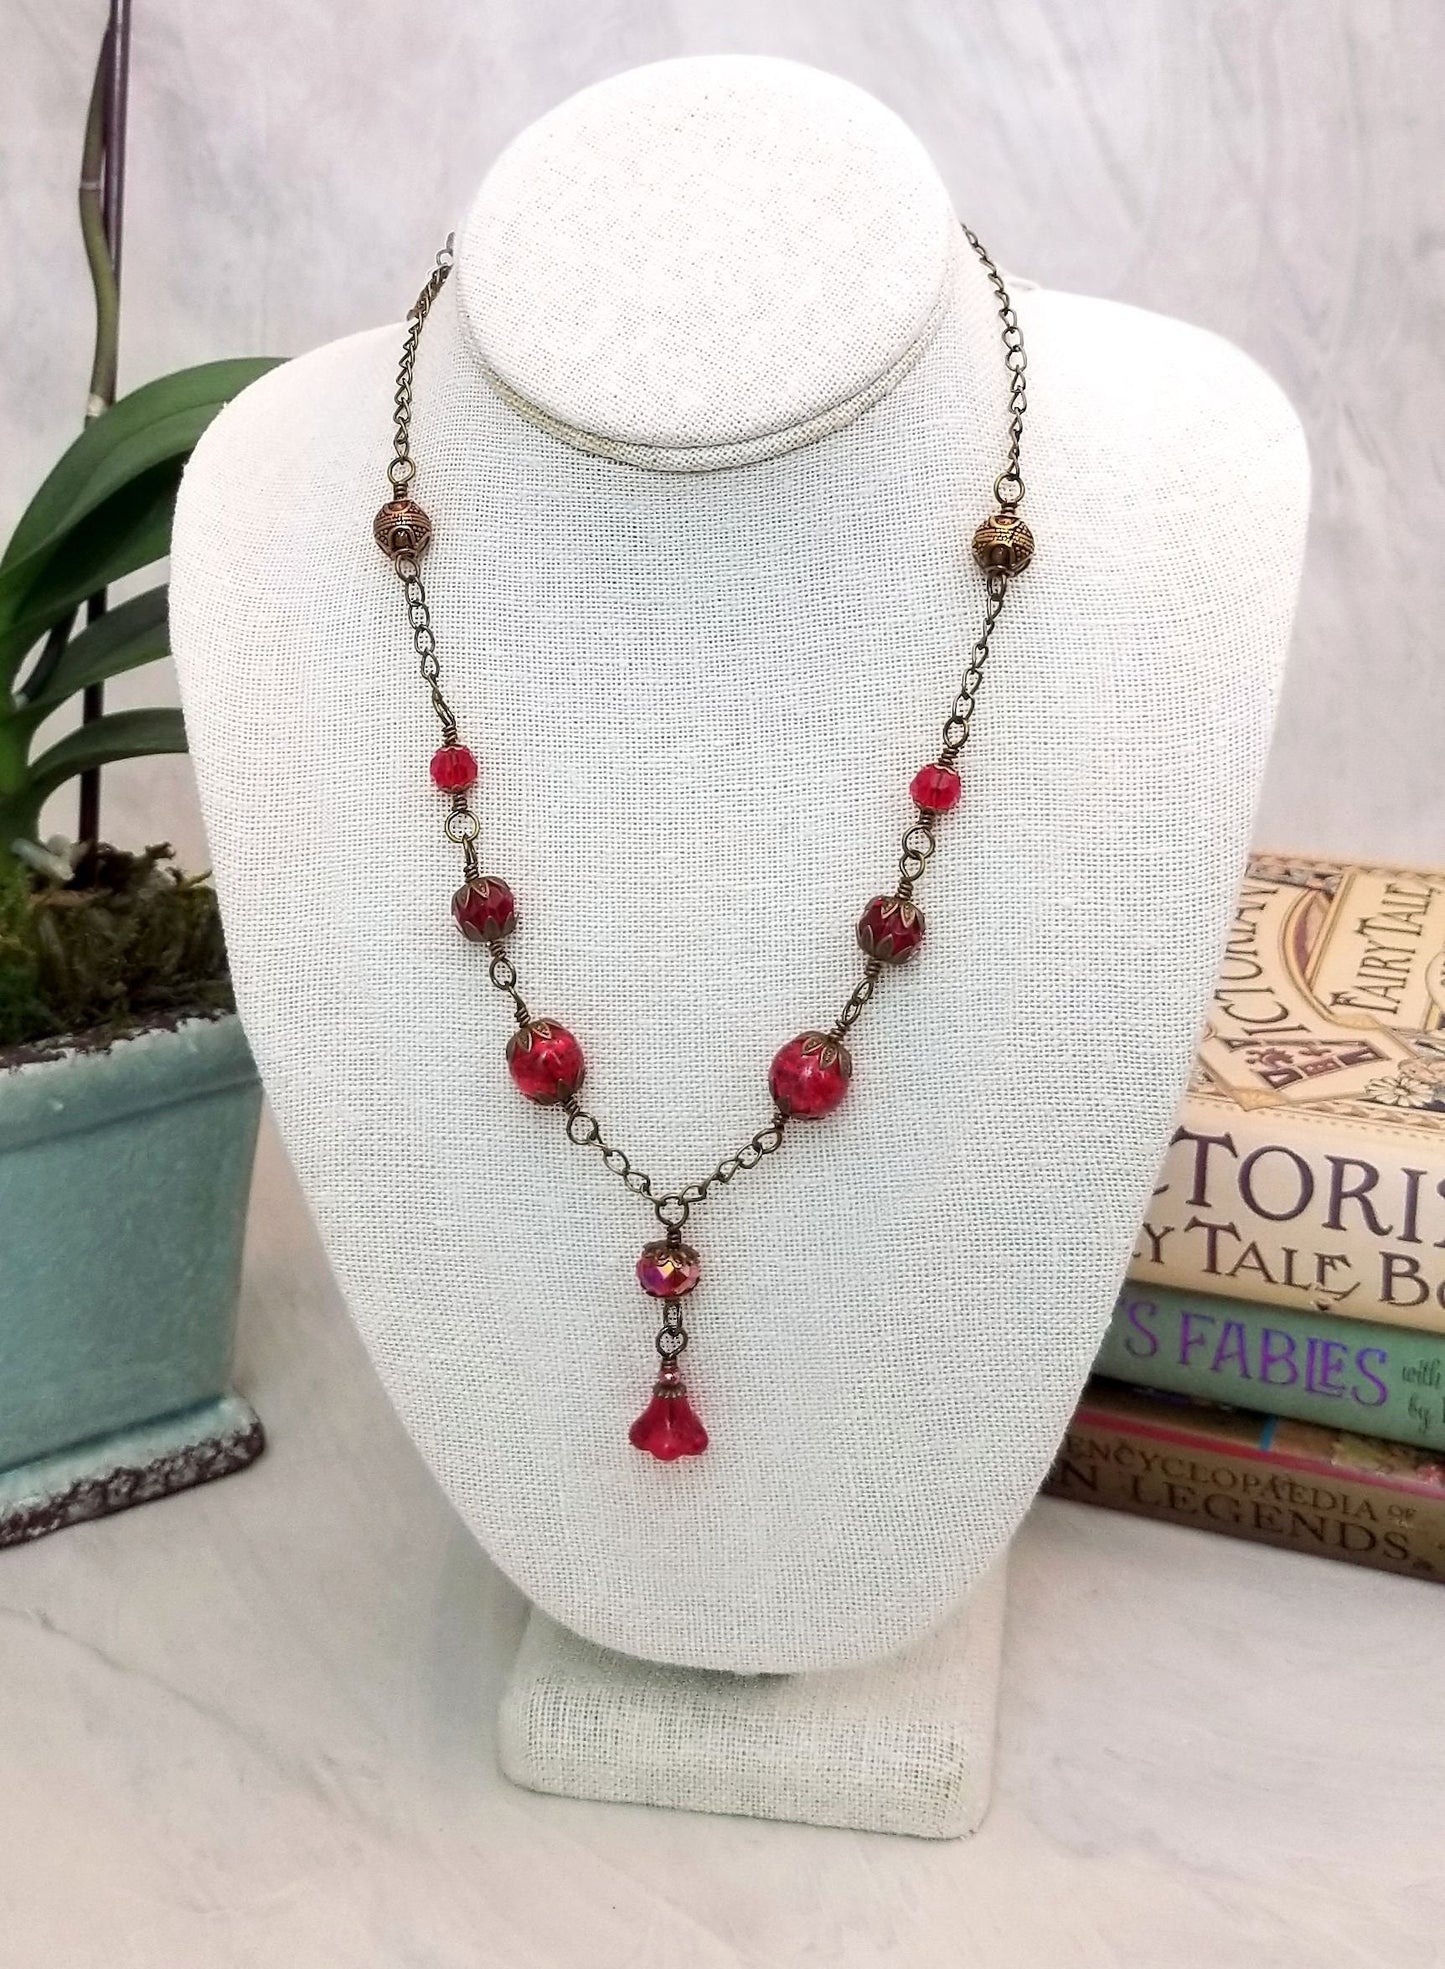 Wire Wrapped Necklace in Red, Boho, Bohemian, Gypsy, Wedding, Bridesmaid, Renaissance, Medieval, Choice of Colors and Metals